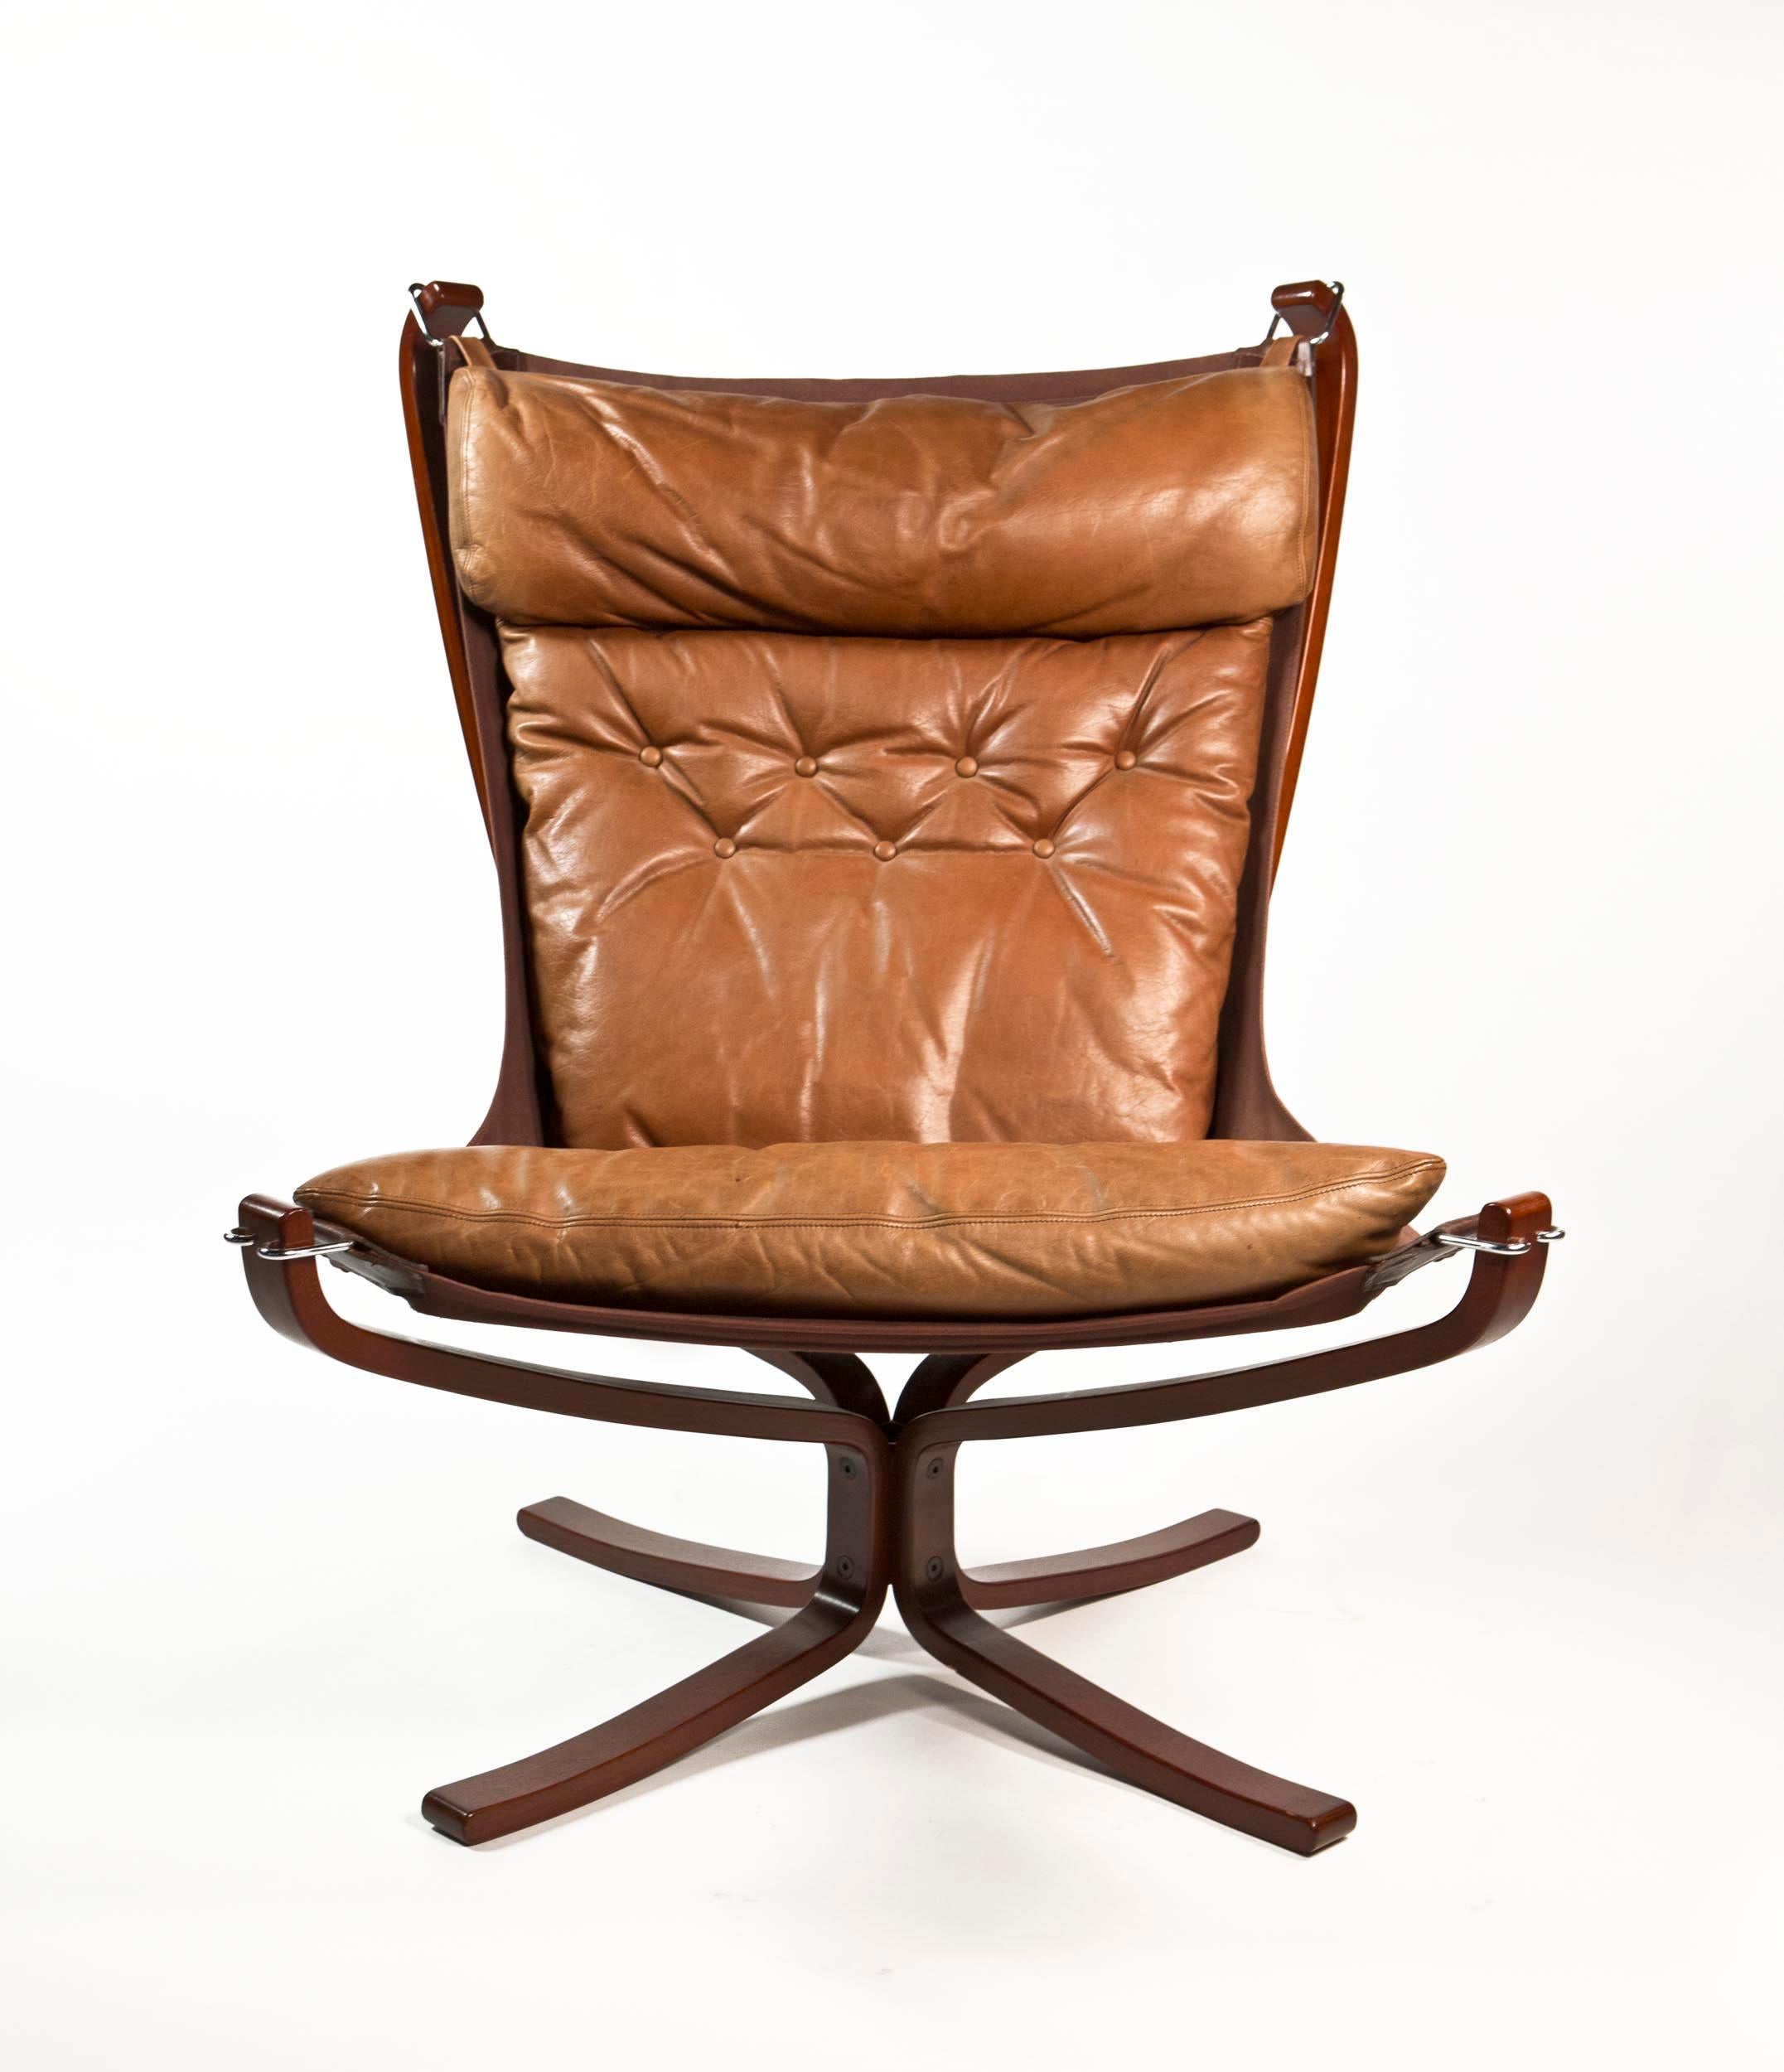 Falcon chair by Sigurd Ressell for Vatne Møbler in brown leather, Norway, 1970s

A super comfortable iconic vintage 1970s Sigurd Ressell designed high-backed X-framed falcon chair for Vatne Mobler Norway.

Milk chocolate leather and canvas sling